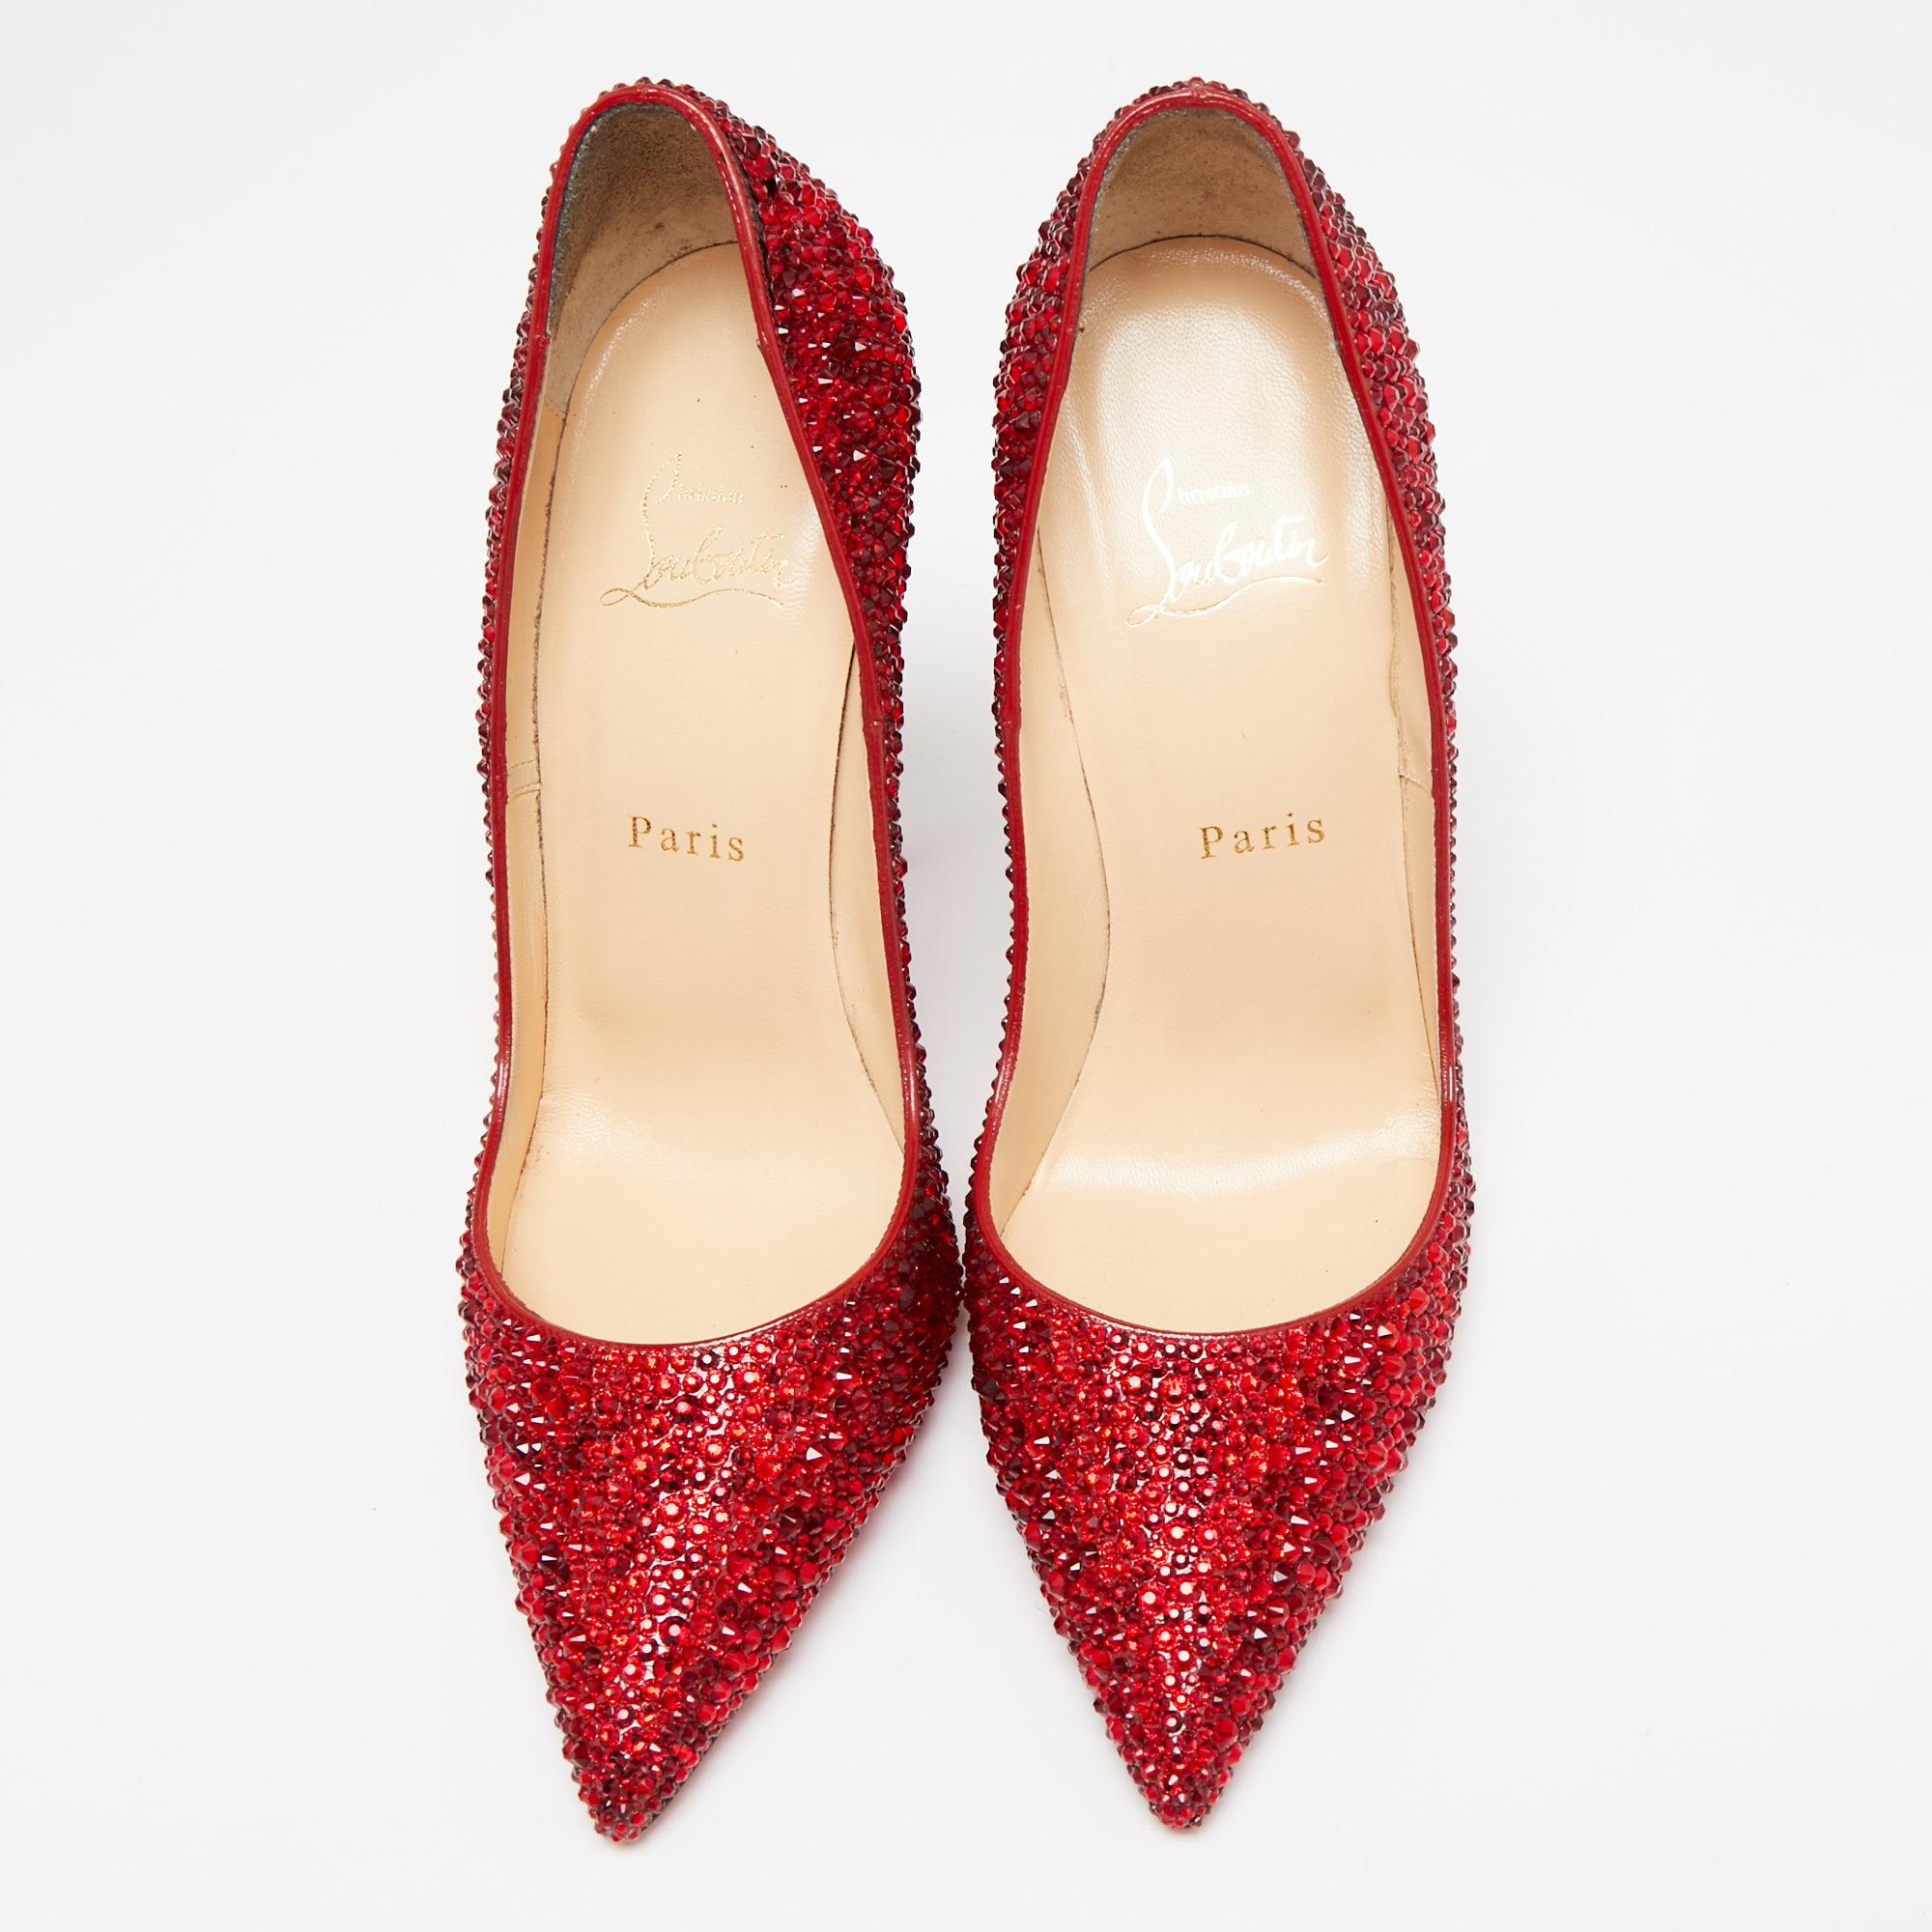 Named after English model Kate Moss, this pair of Christian Louboutin So Kate pumps reflects elegance and sophistication in every step. Proving the brand's expertise in the art of stiletto making, it has been diligently crafted from red leather on